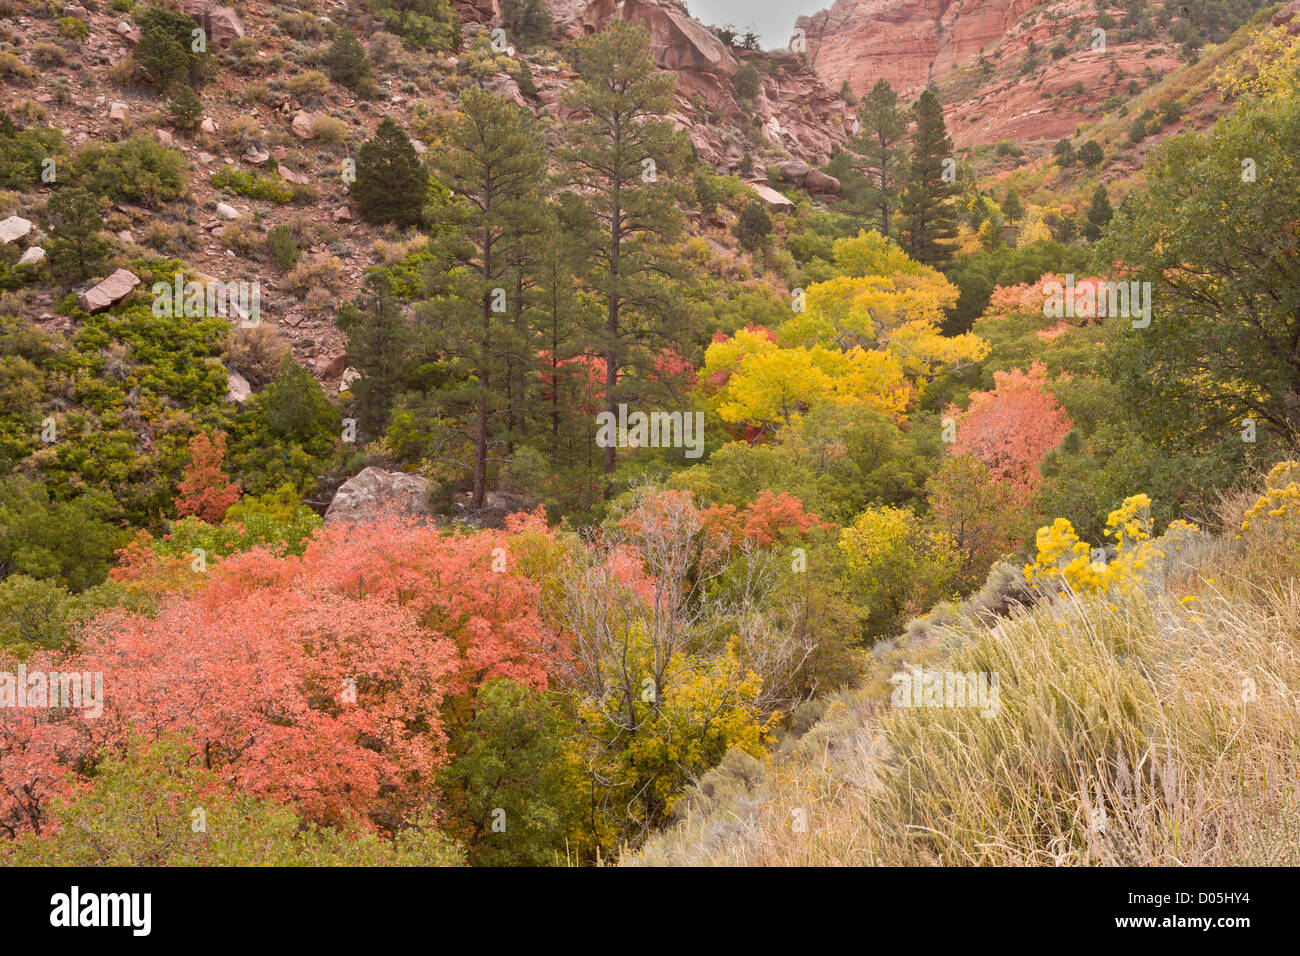 Mixed scrub and trees, including Canyon Maple, in autumn colours; side valley, Kolob Canyon, Zion National Park Stock Photo